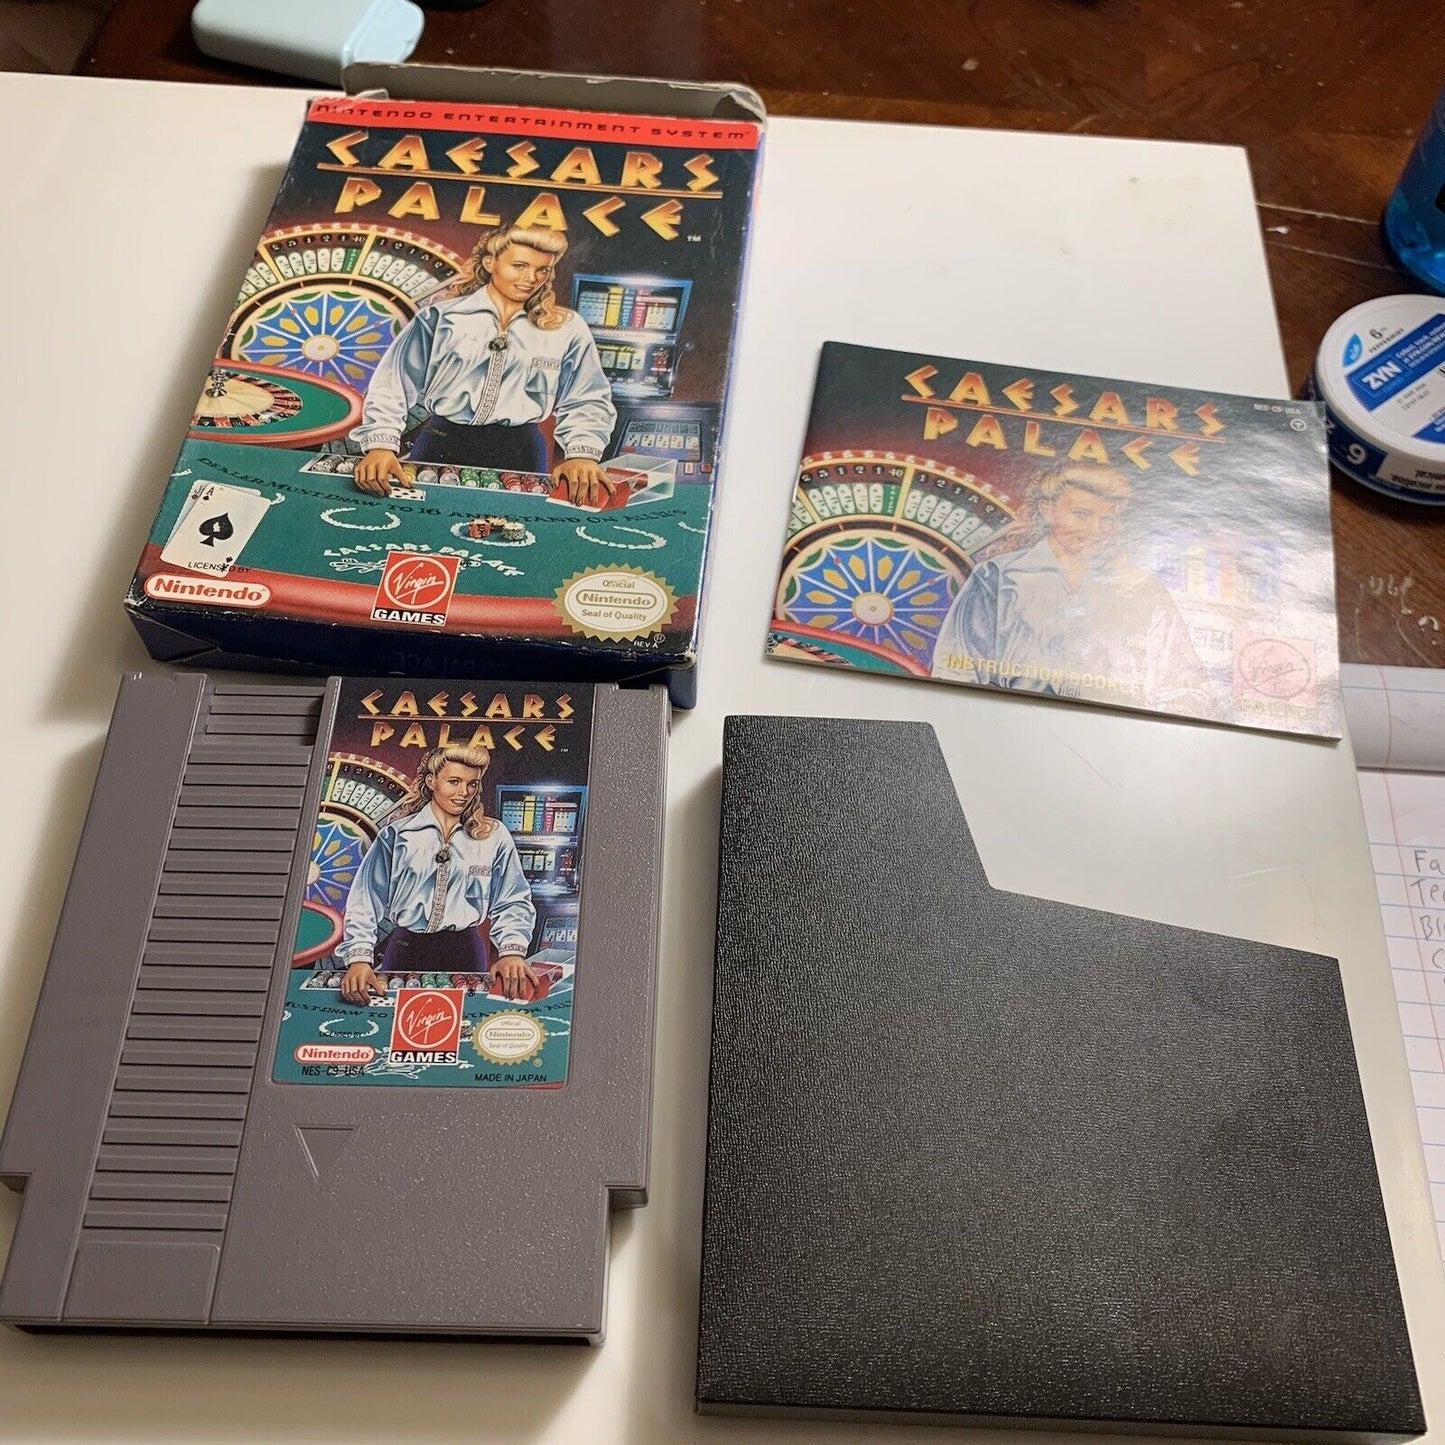 Caesars Palace for NES Nintendo Complete In Box CIB excellent condition